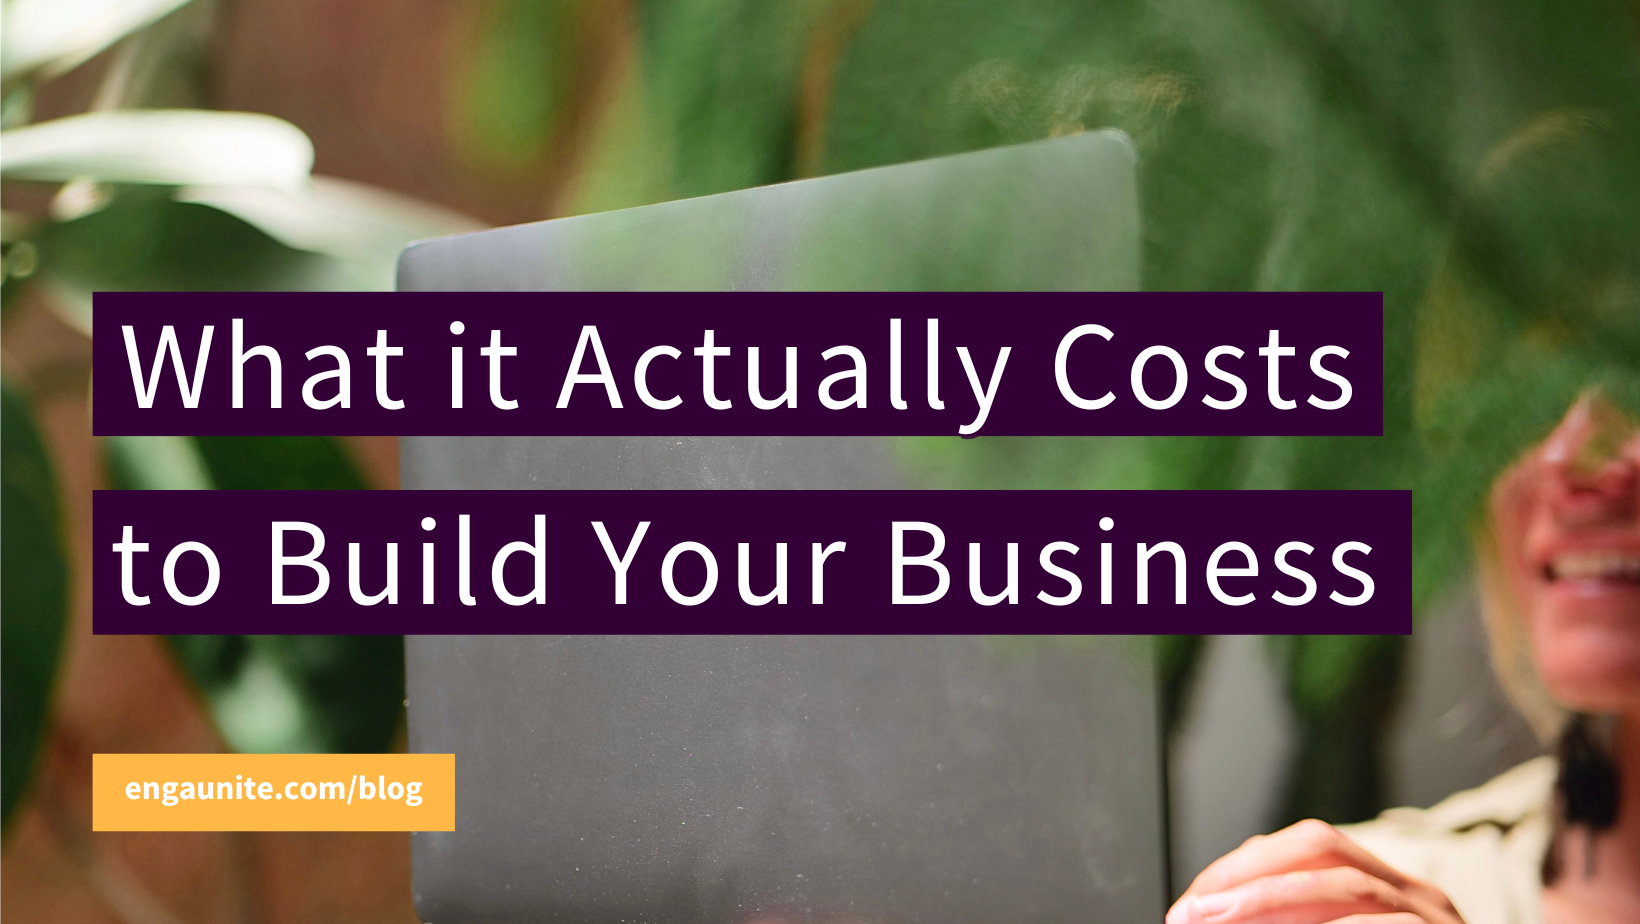 What it Actually Costs to Build Your Business